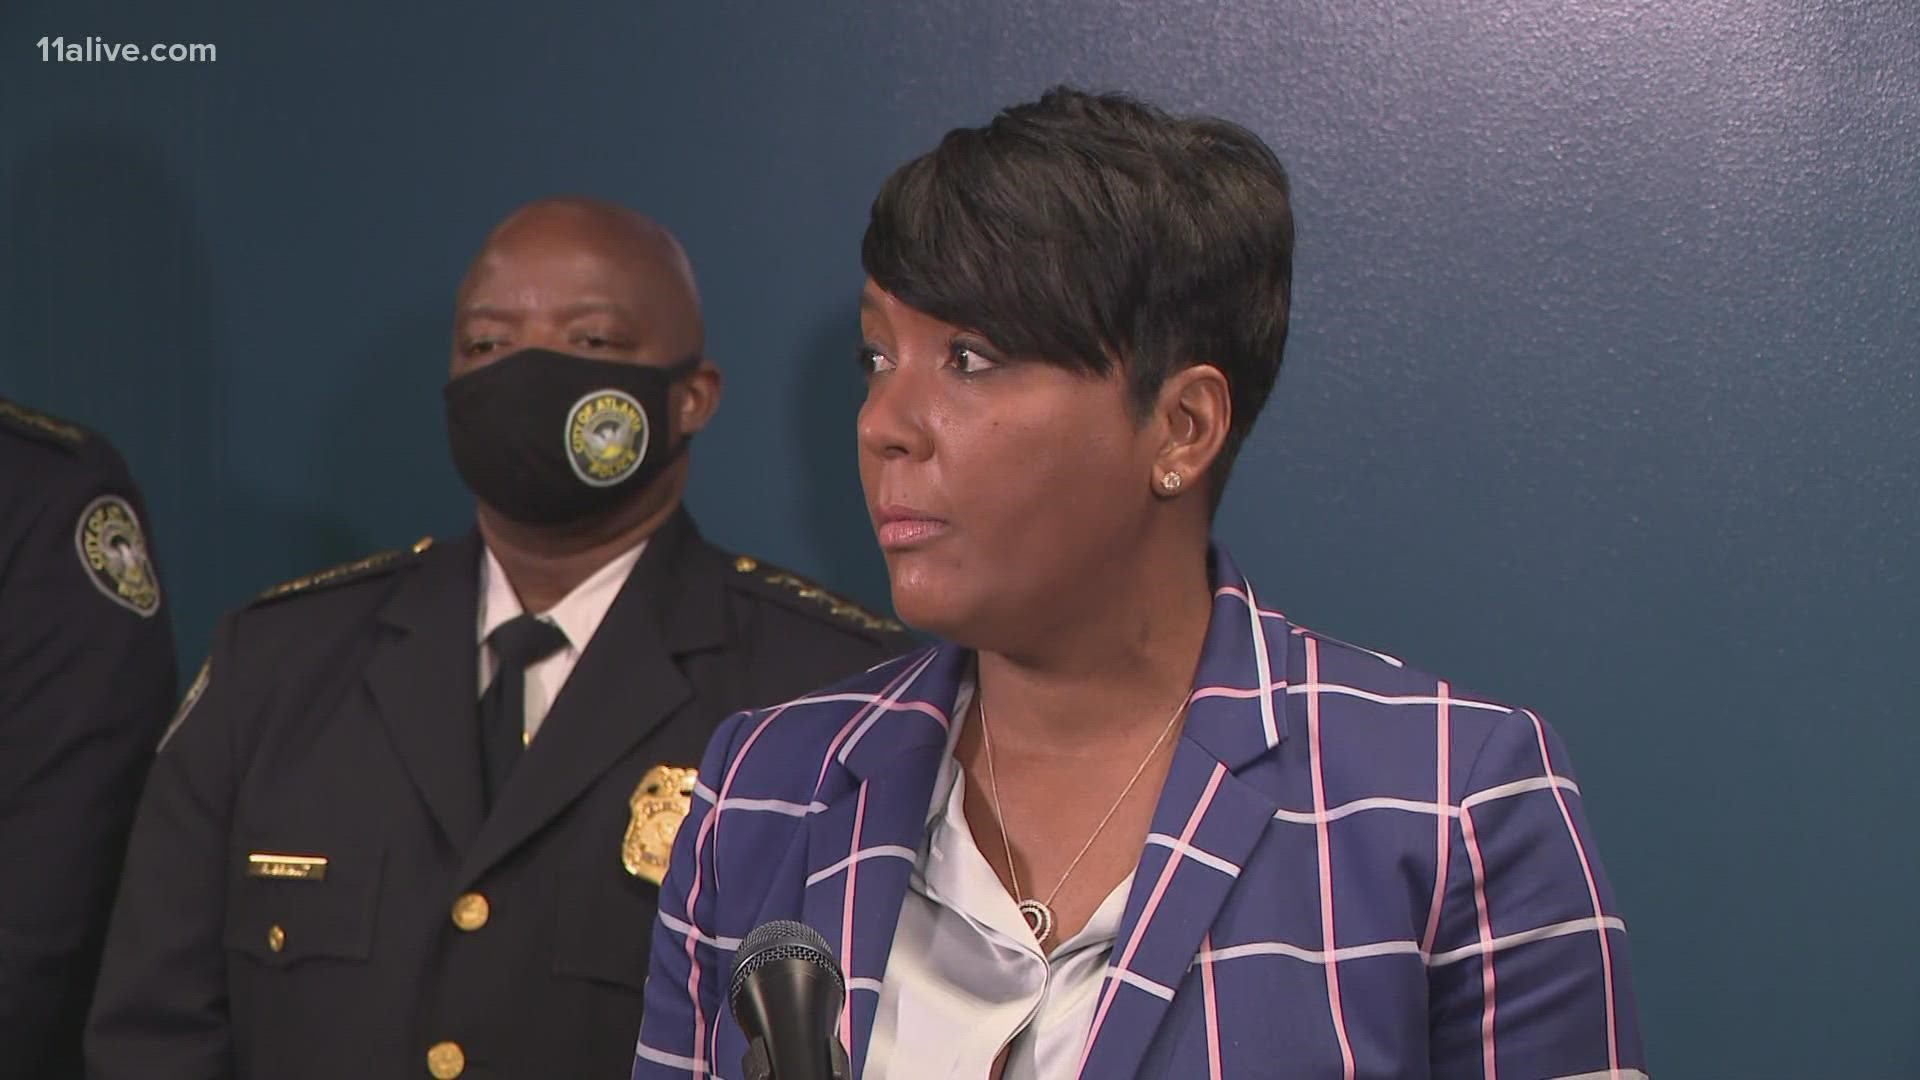 The mayor affirmed her support Thursday for a land deal to facilitate the building of a new police/training center.